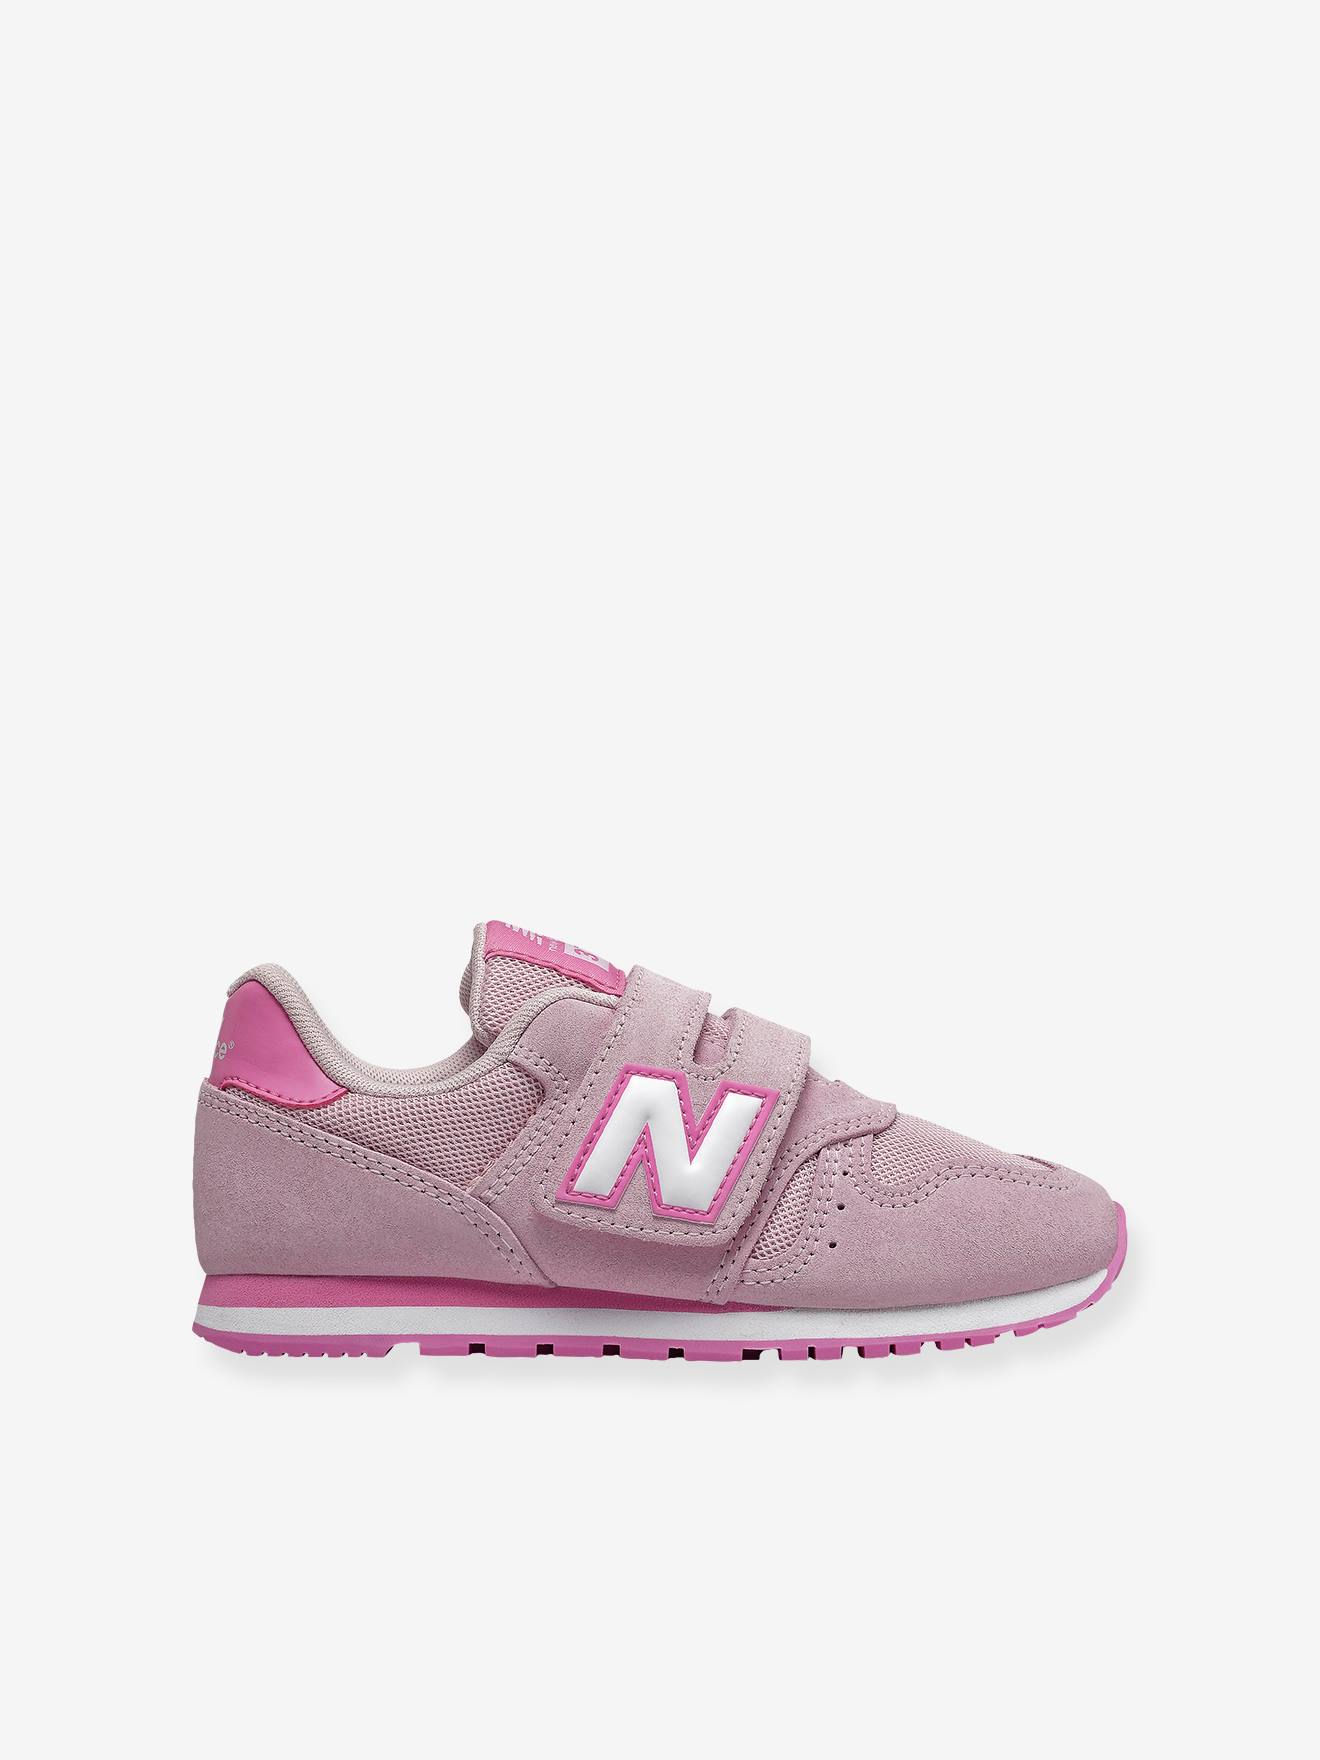 Baskets cuir scratchées fille YV373SP NEW BALANCE - rose clair